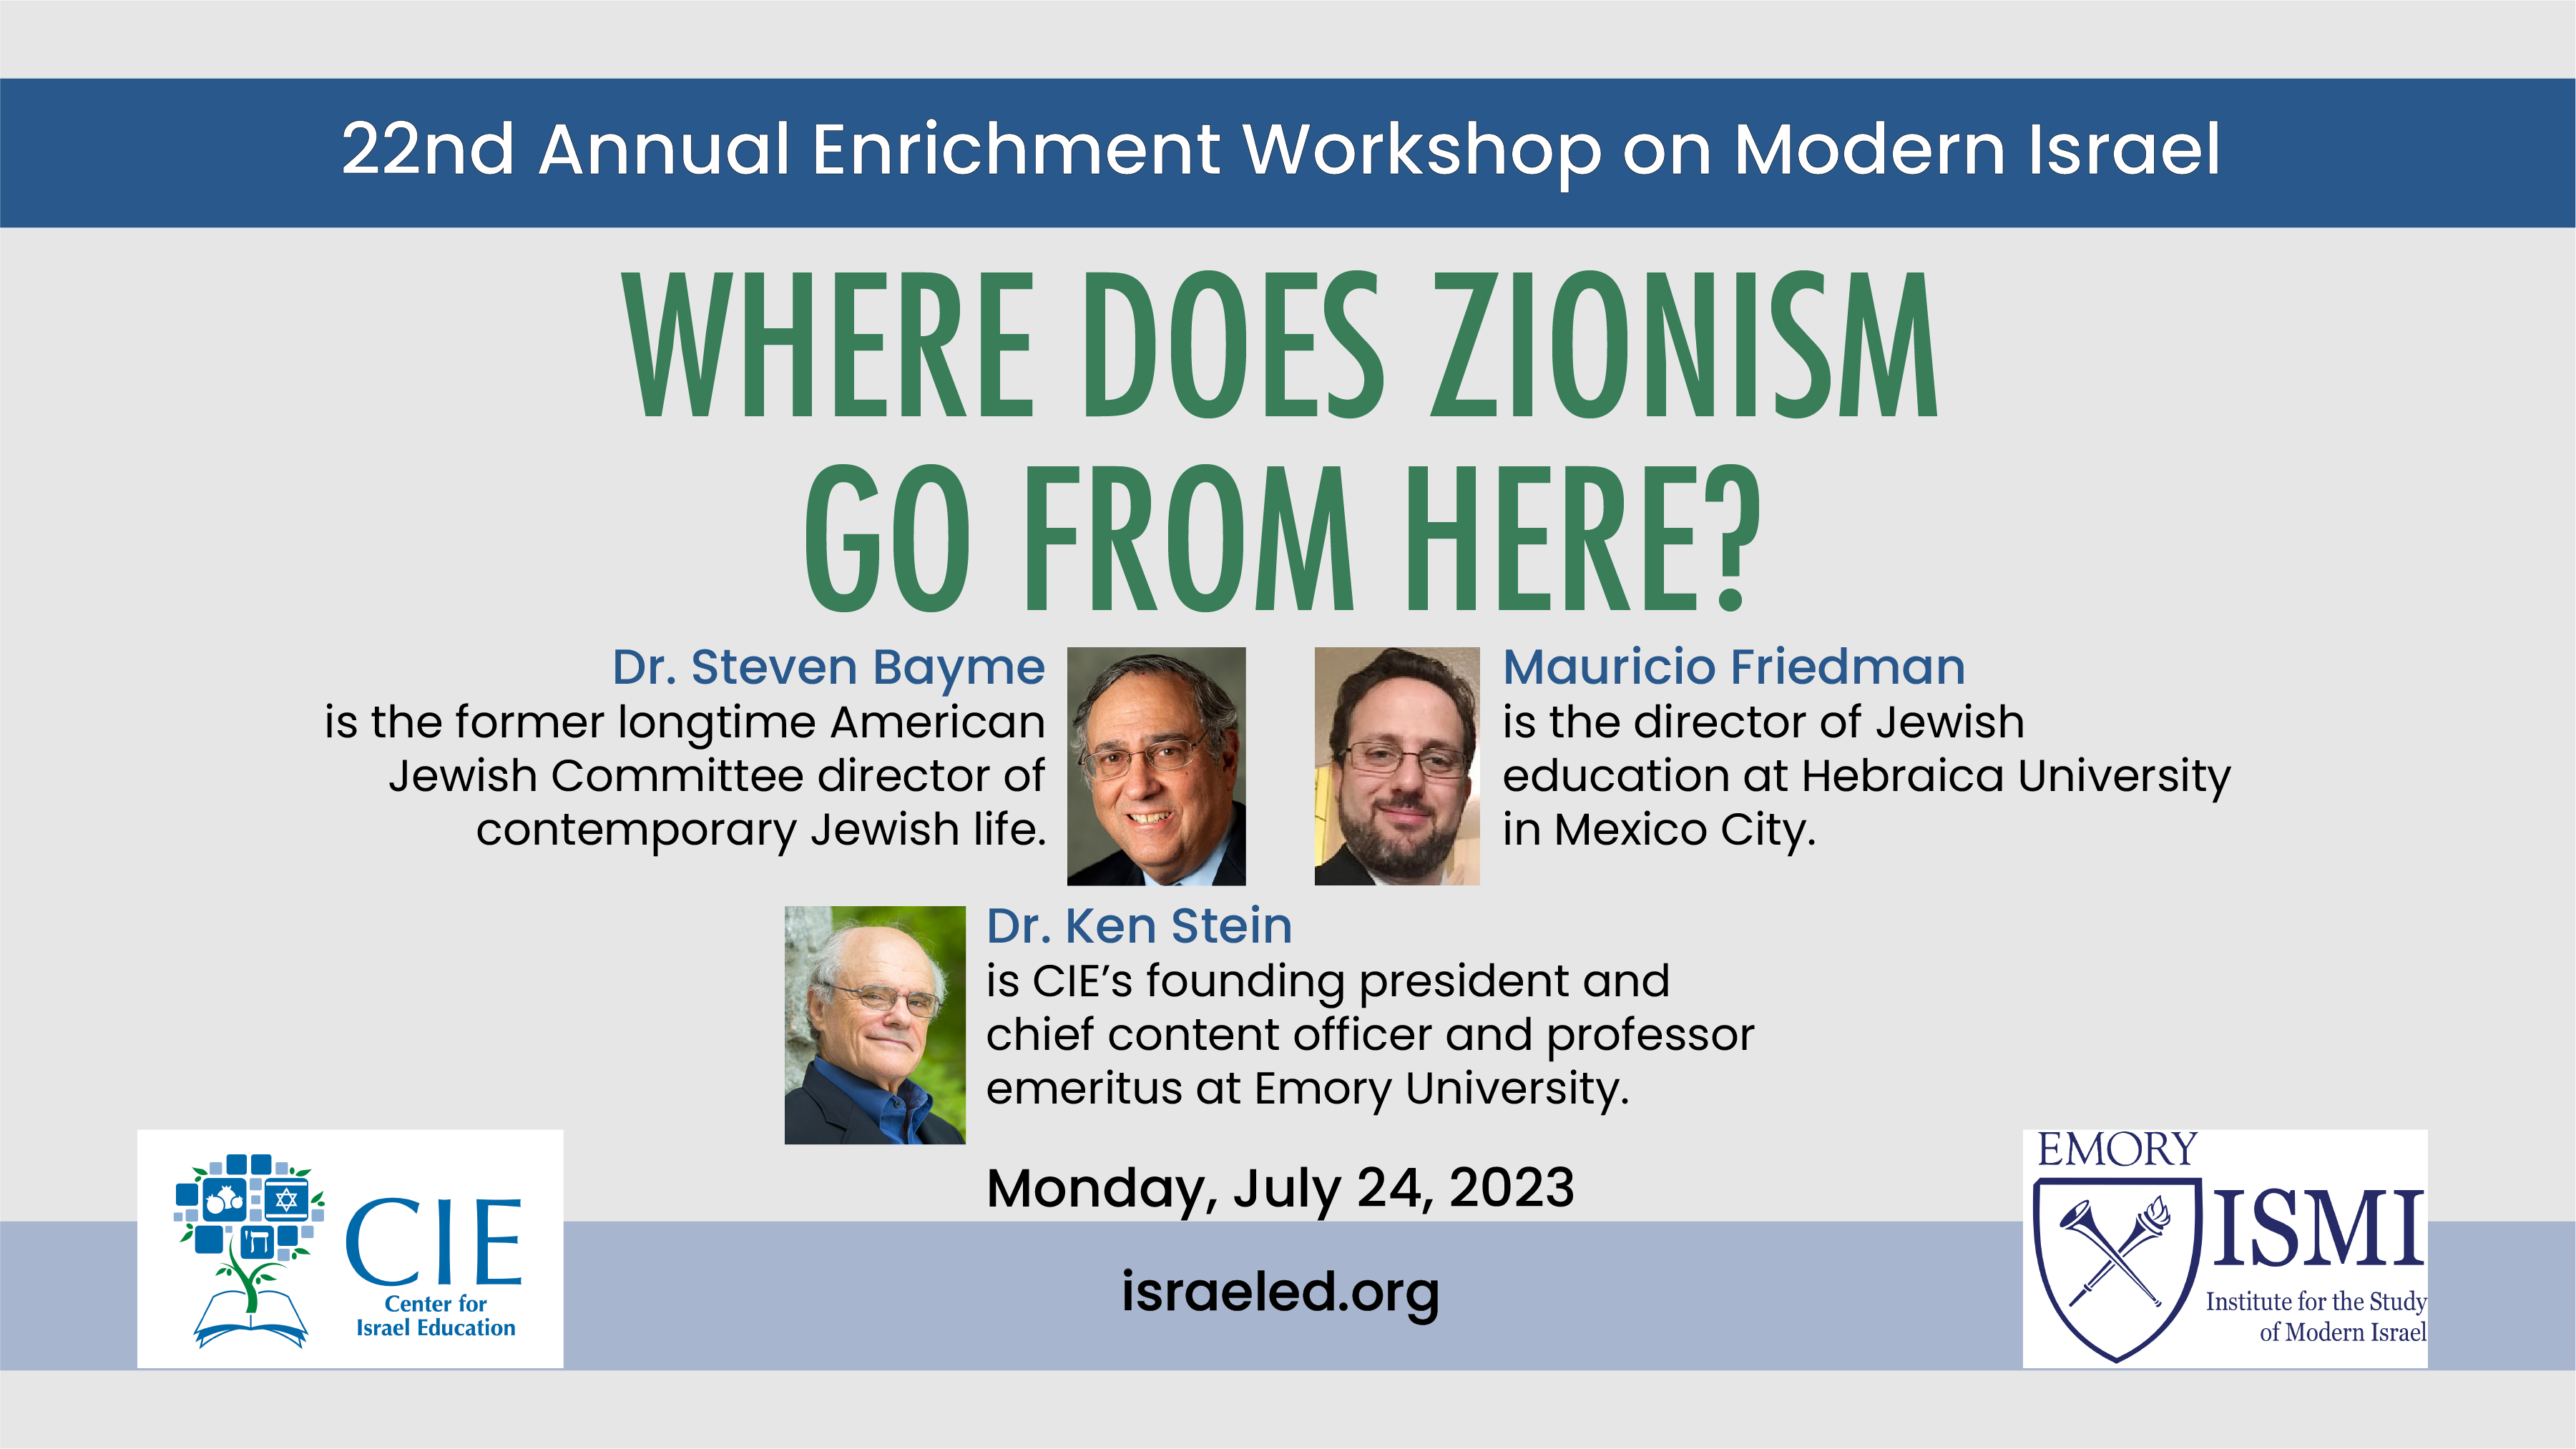 Steven Bayme and Mauricio Friedman, “Where does Zionism Go from Here” (32:00), Views from the United States and Mexico